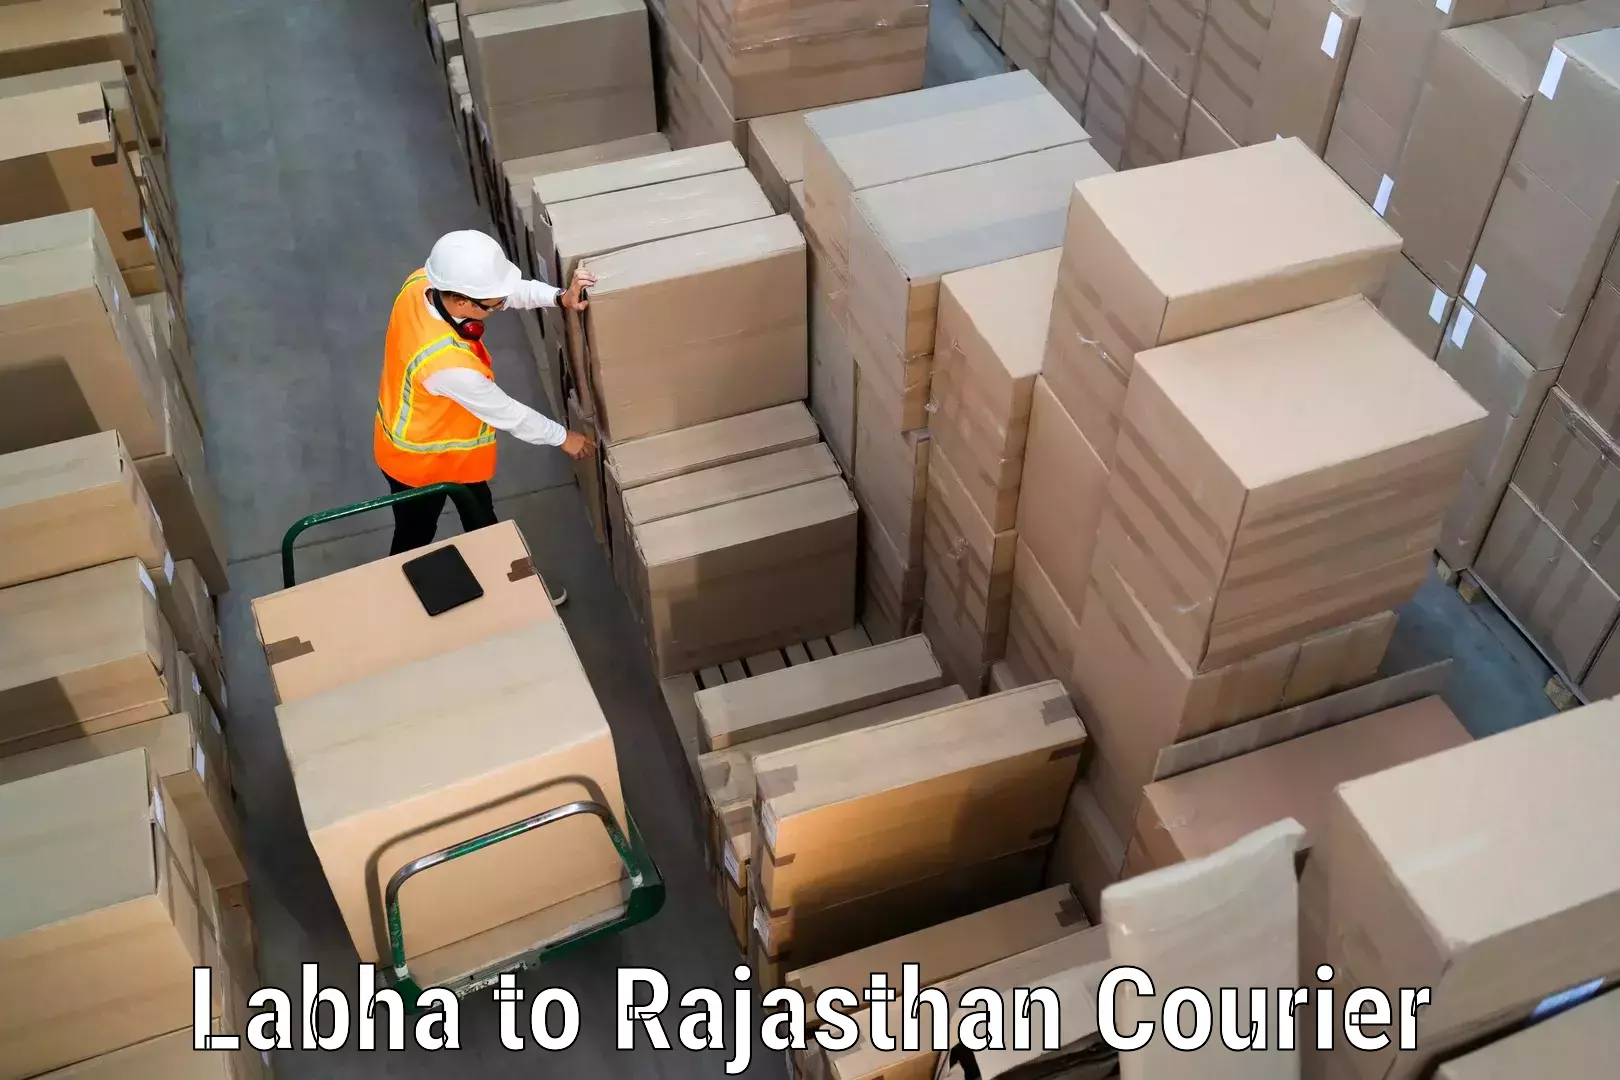 Courier service booking Labha to Nagar